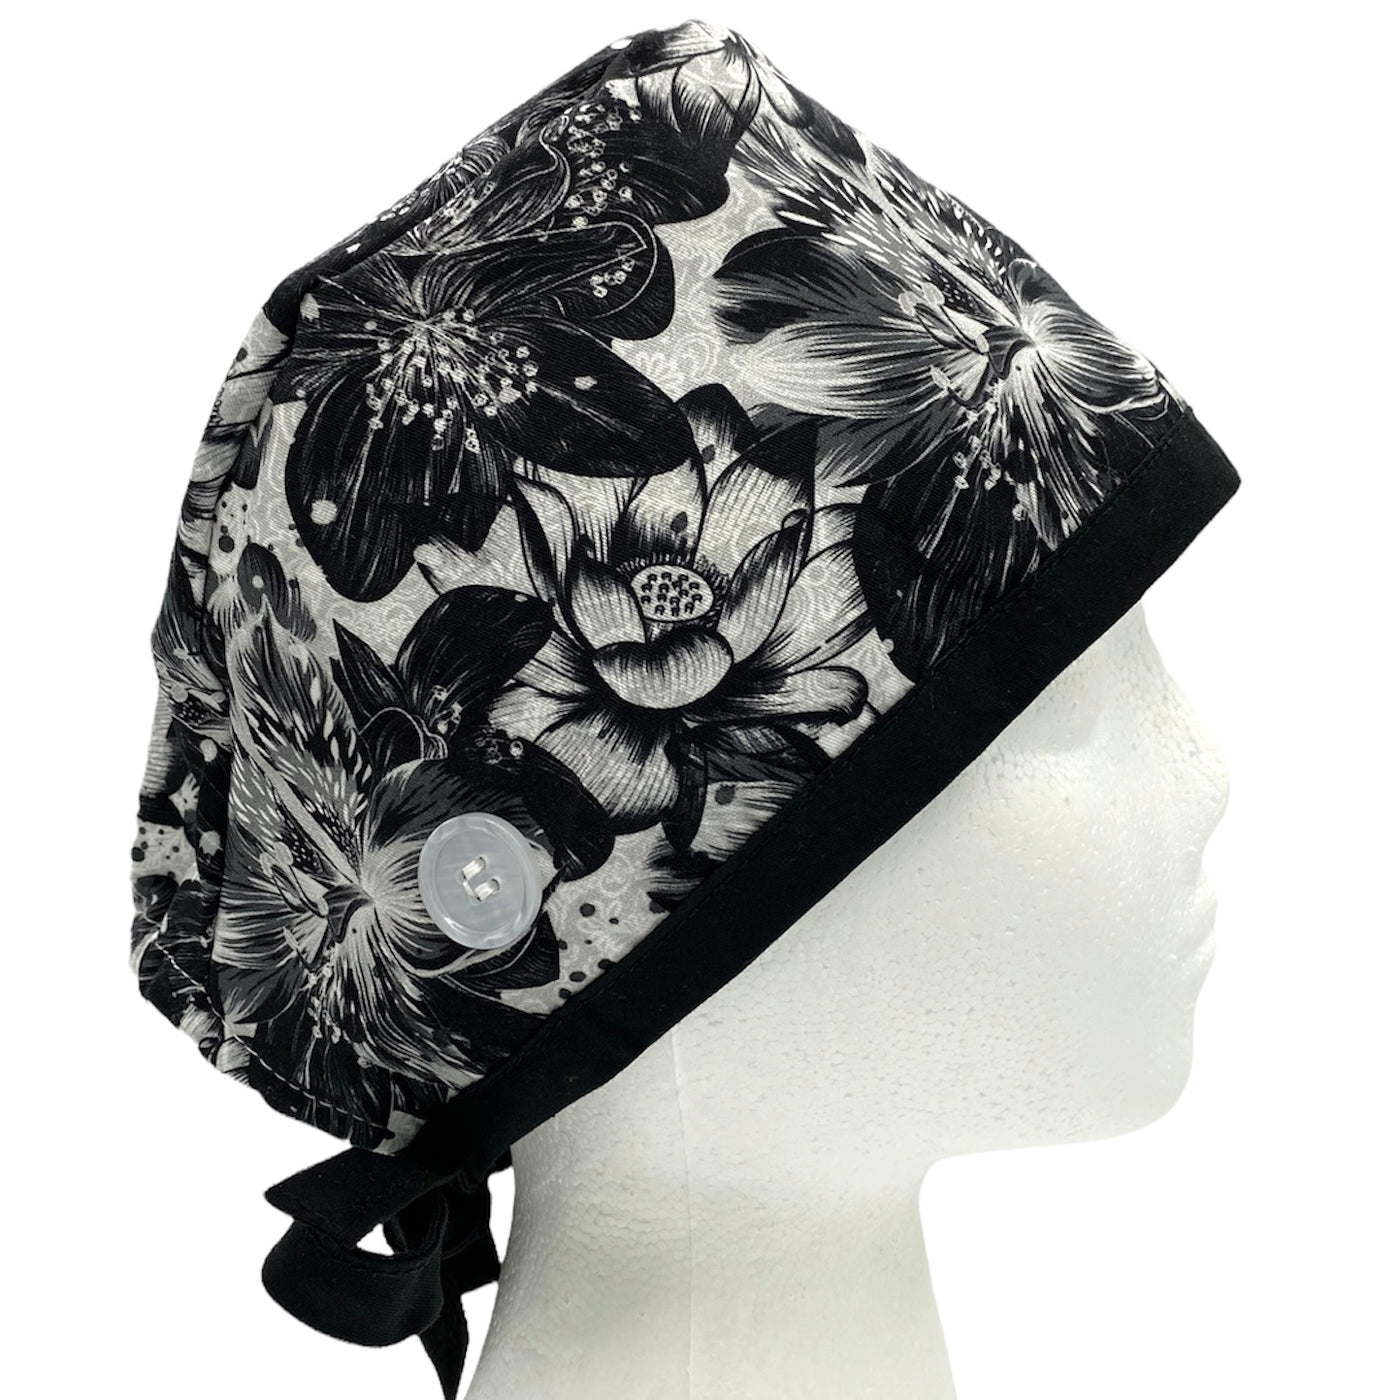 black and white floral scrub cap - unisex style with buttons and satin lining by sunshine shops co. Surgical scrub hat